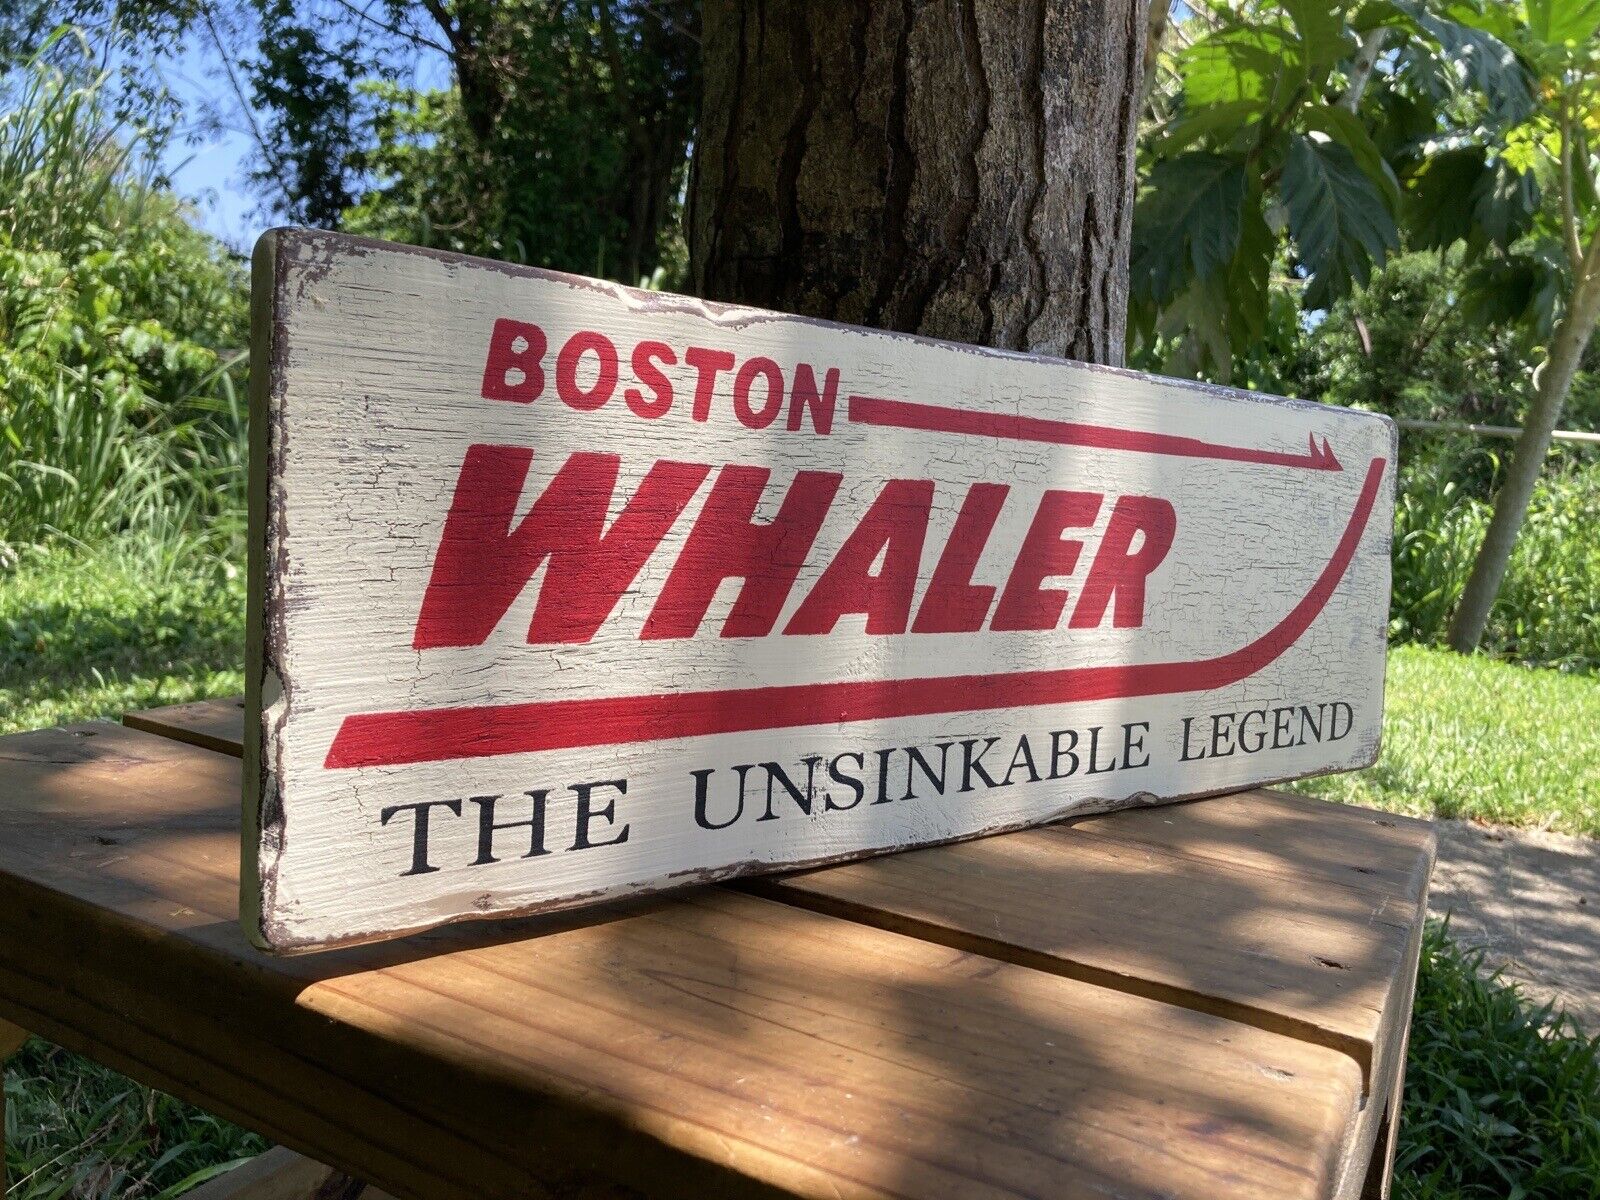 Boston Whaler Wood Sign Nautical Distressed Vintage Antique Look